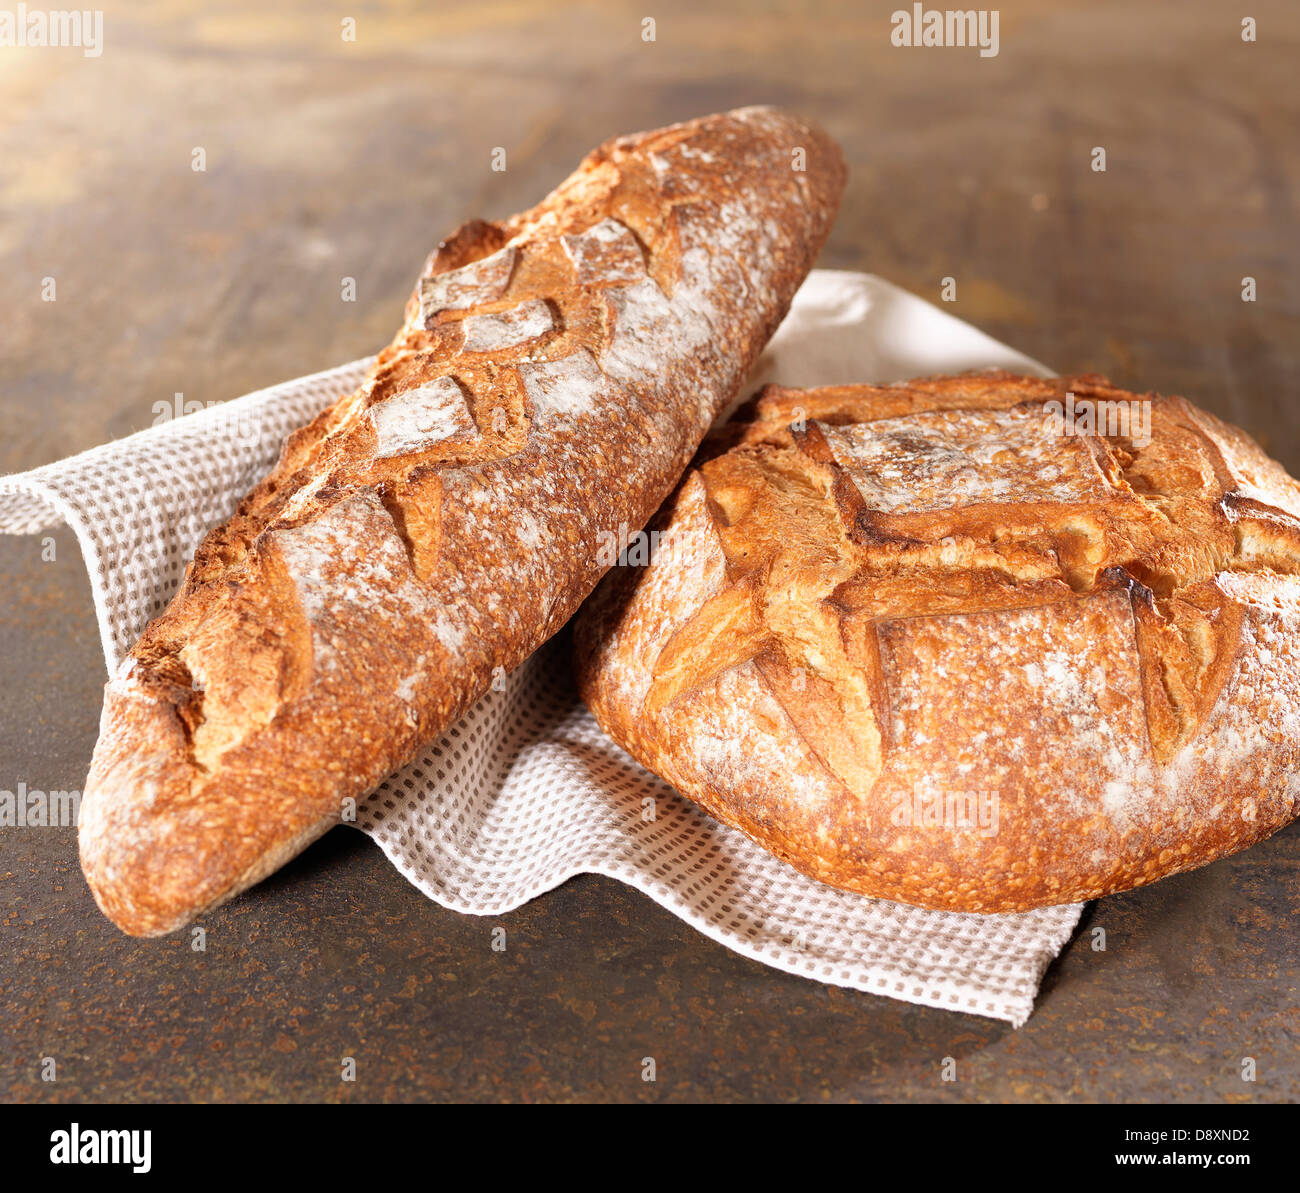 Two loaves of bread Stock Photo